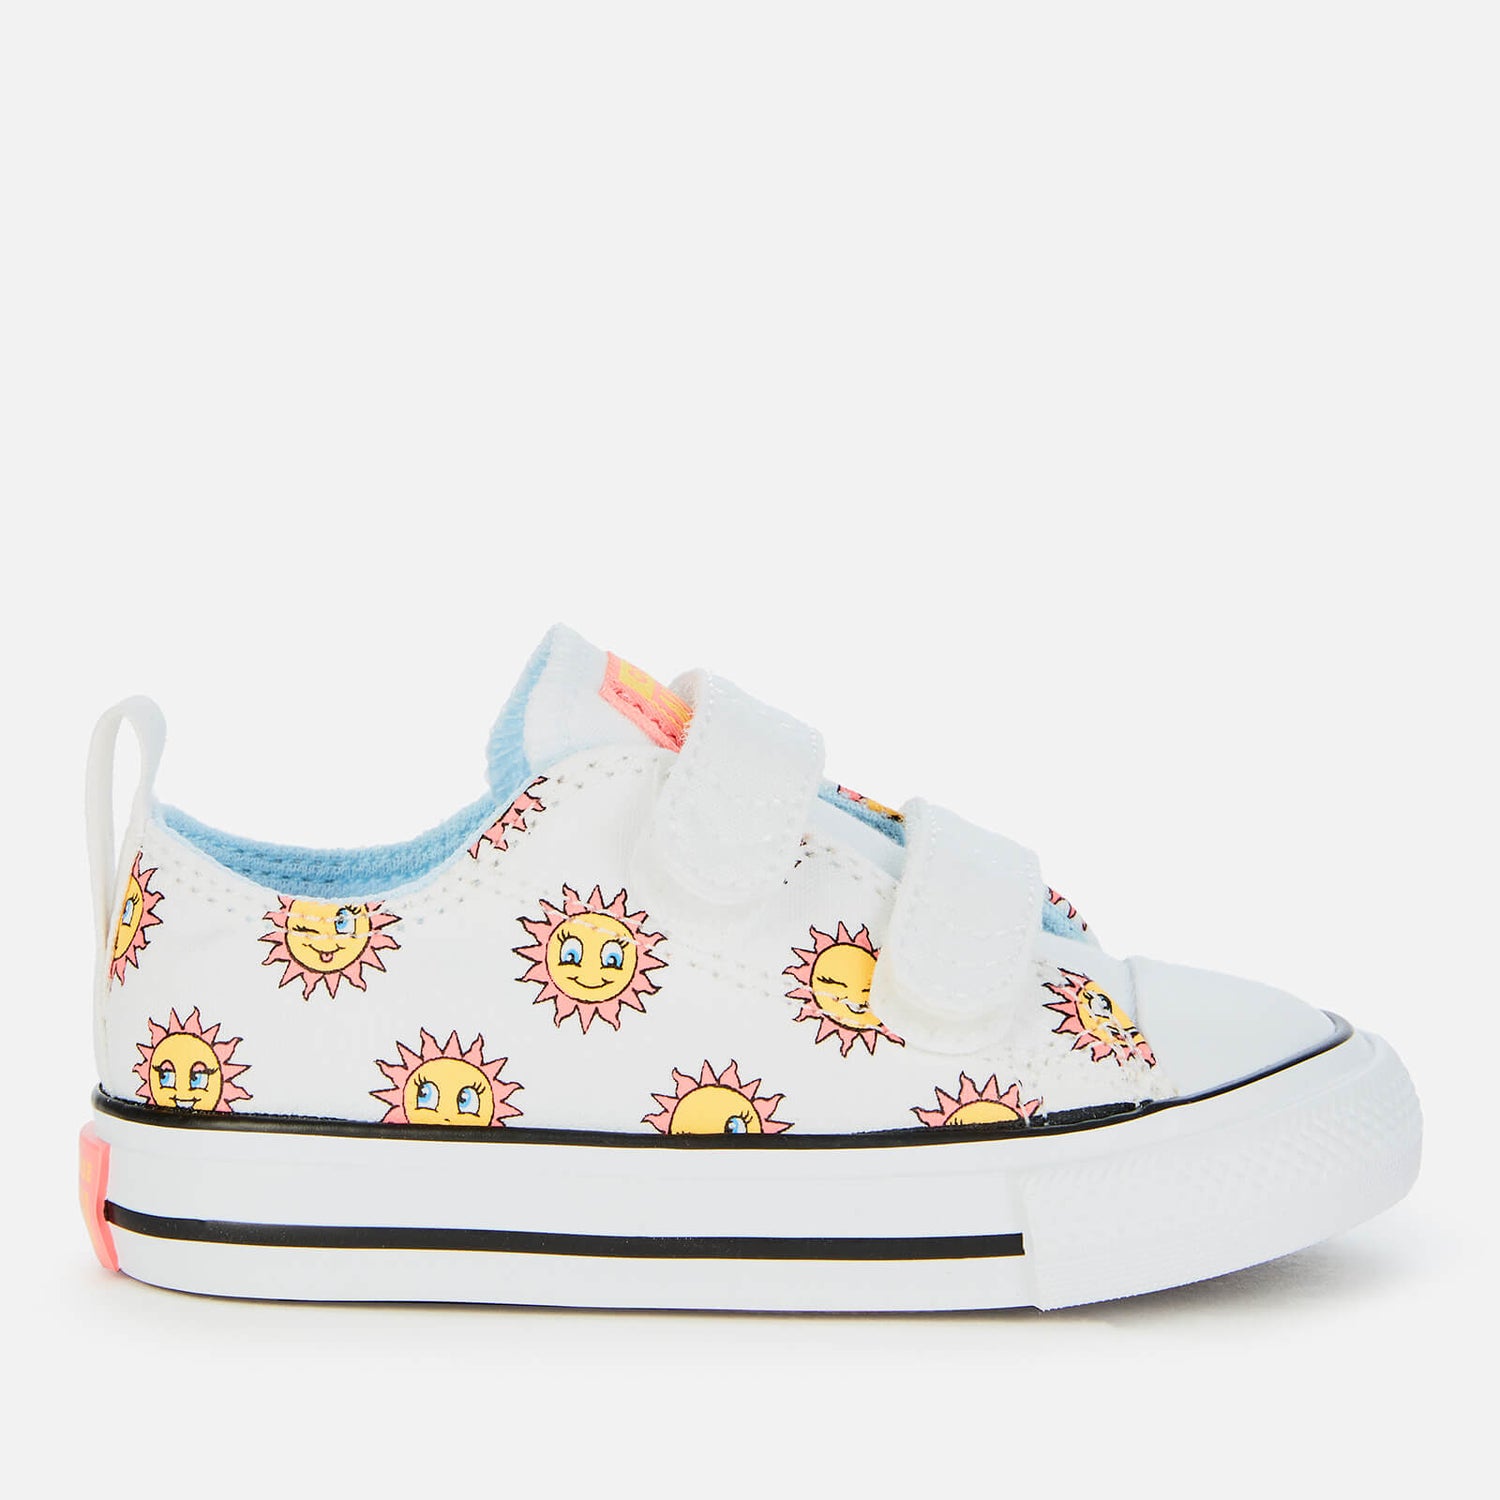 Converse Toddlers' Chase The Sun Chuck Taylor All Star Velcro Ox Trainers - White/Citron Pulse/Chambray Blue